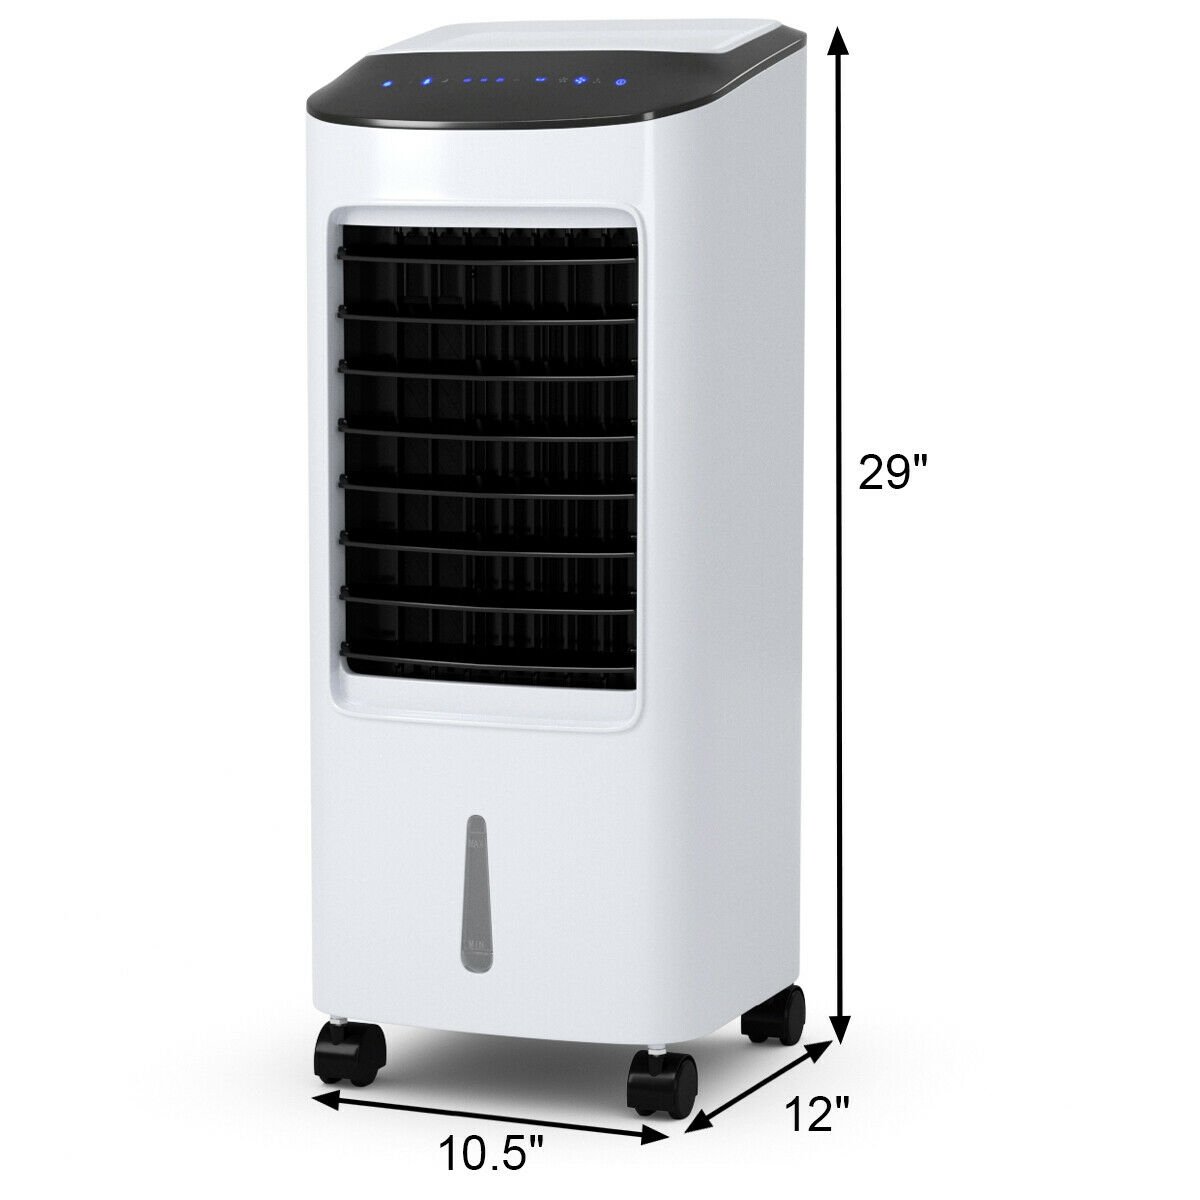 Evaporative Portable Air Cooler Fan Humidifier with Remote Control for Home and Office, Black & White